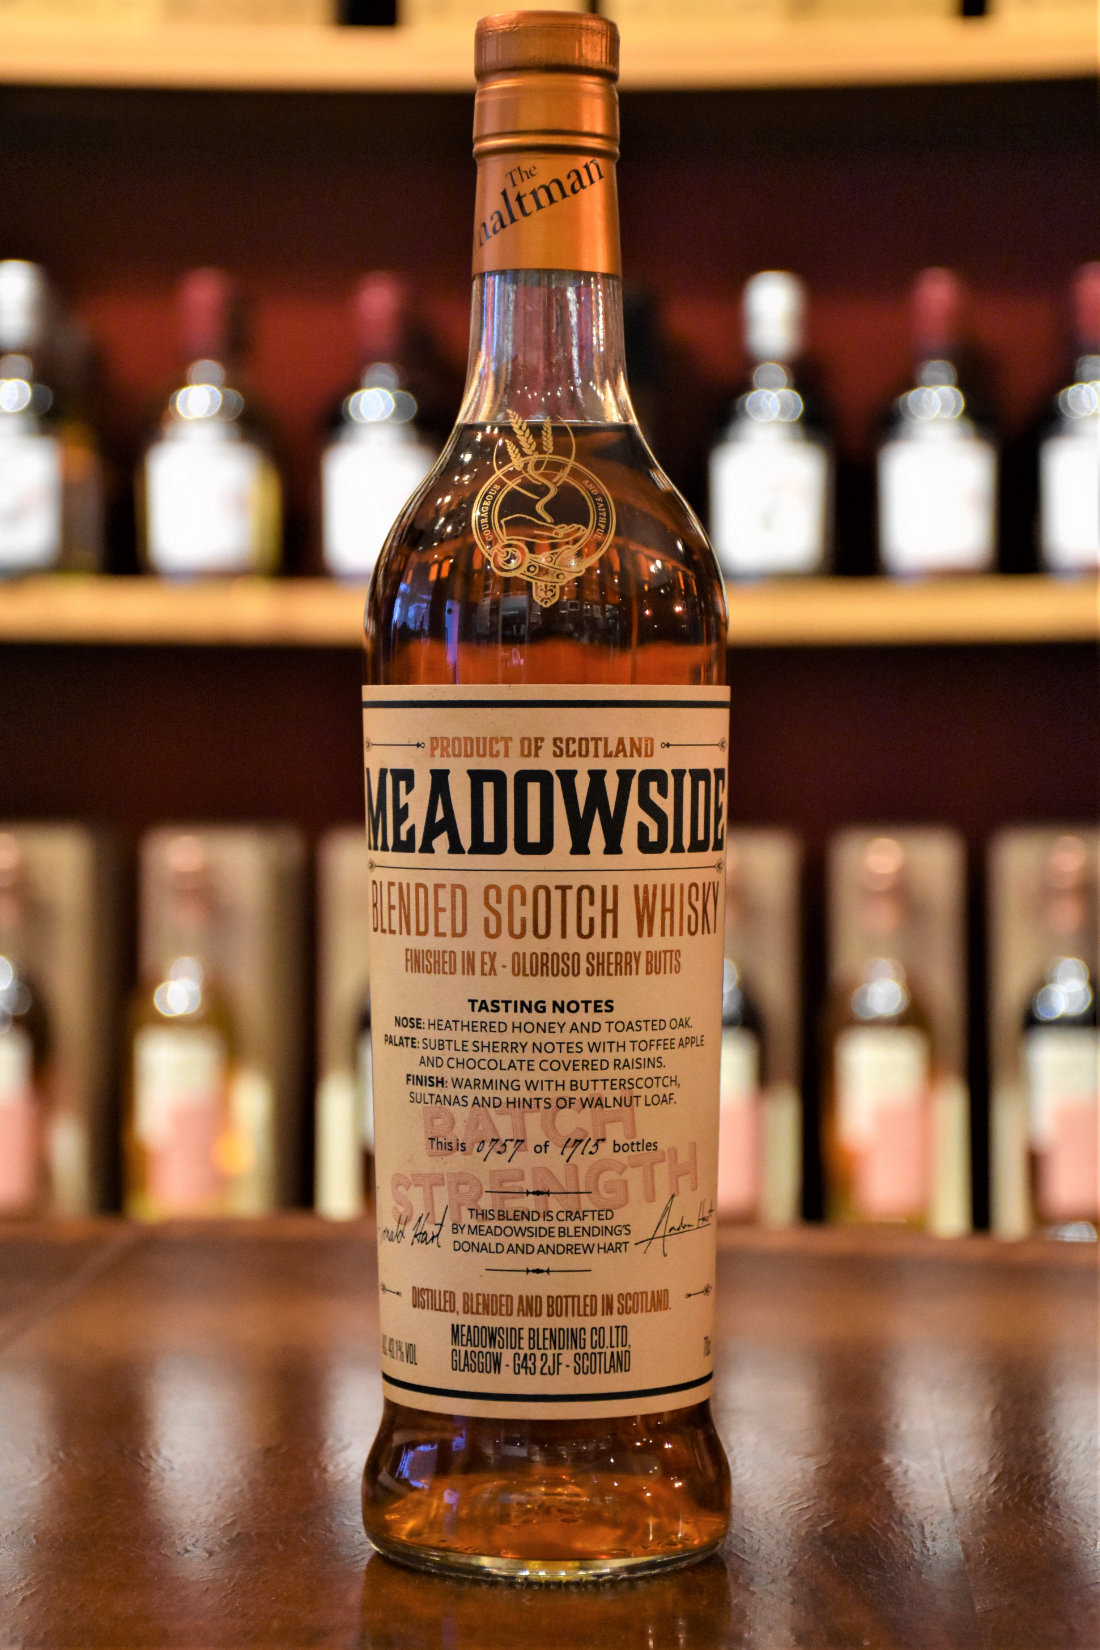 Meadowside Blended Scotch Whisky, Oloroso Sherry Butts